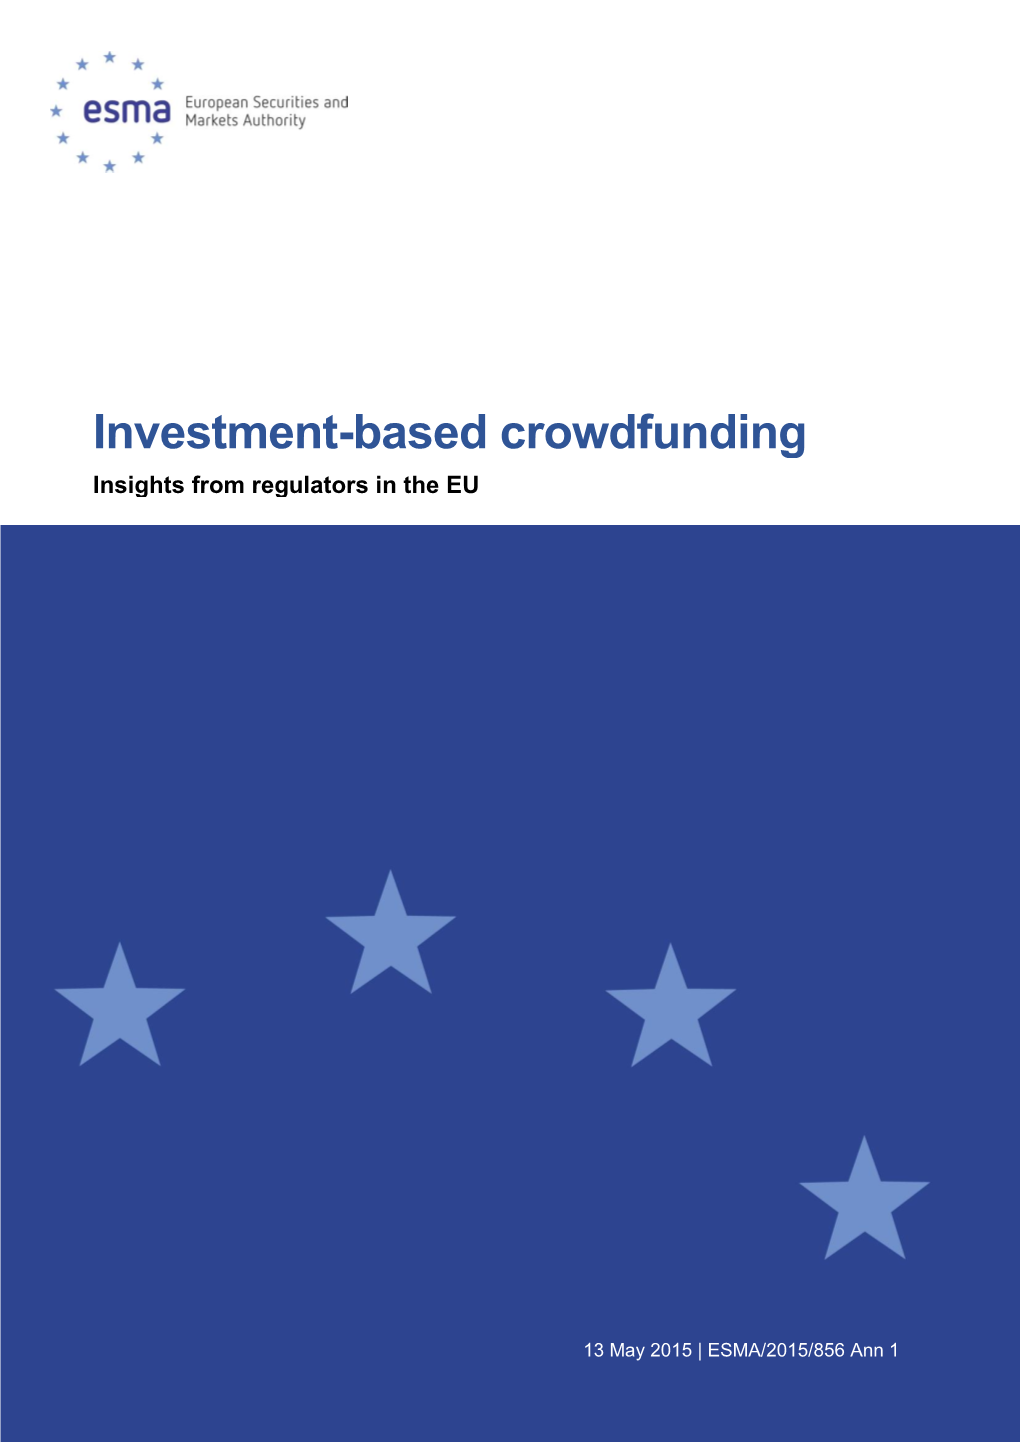 Investment-Based Crowdfunding Insights from Regulators in the EU